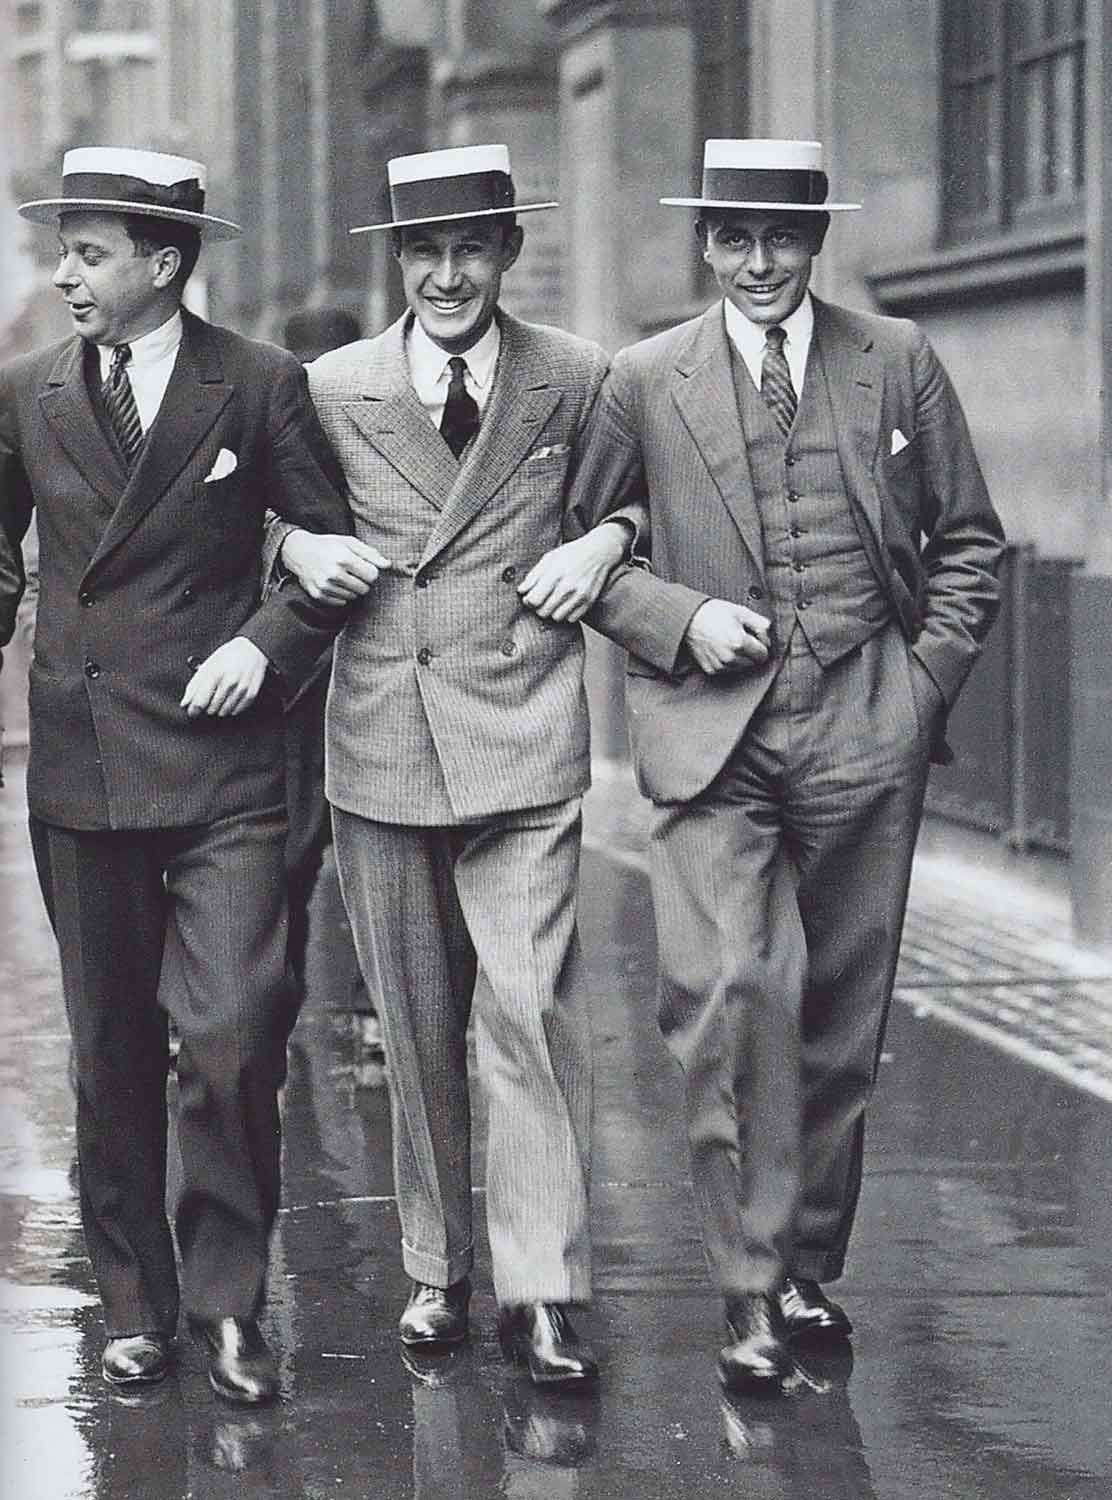 Boater hats were a feature of 1920s men's fashion